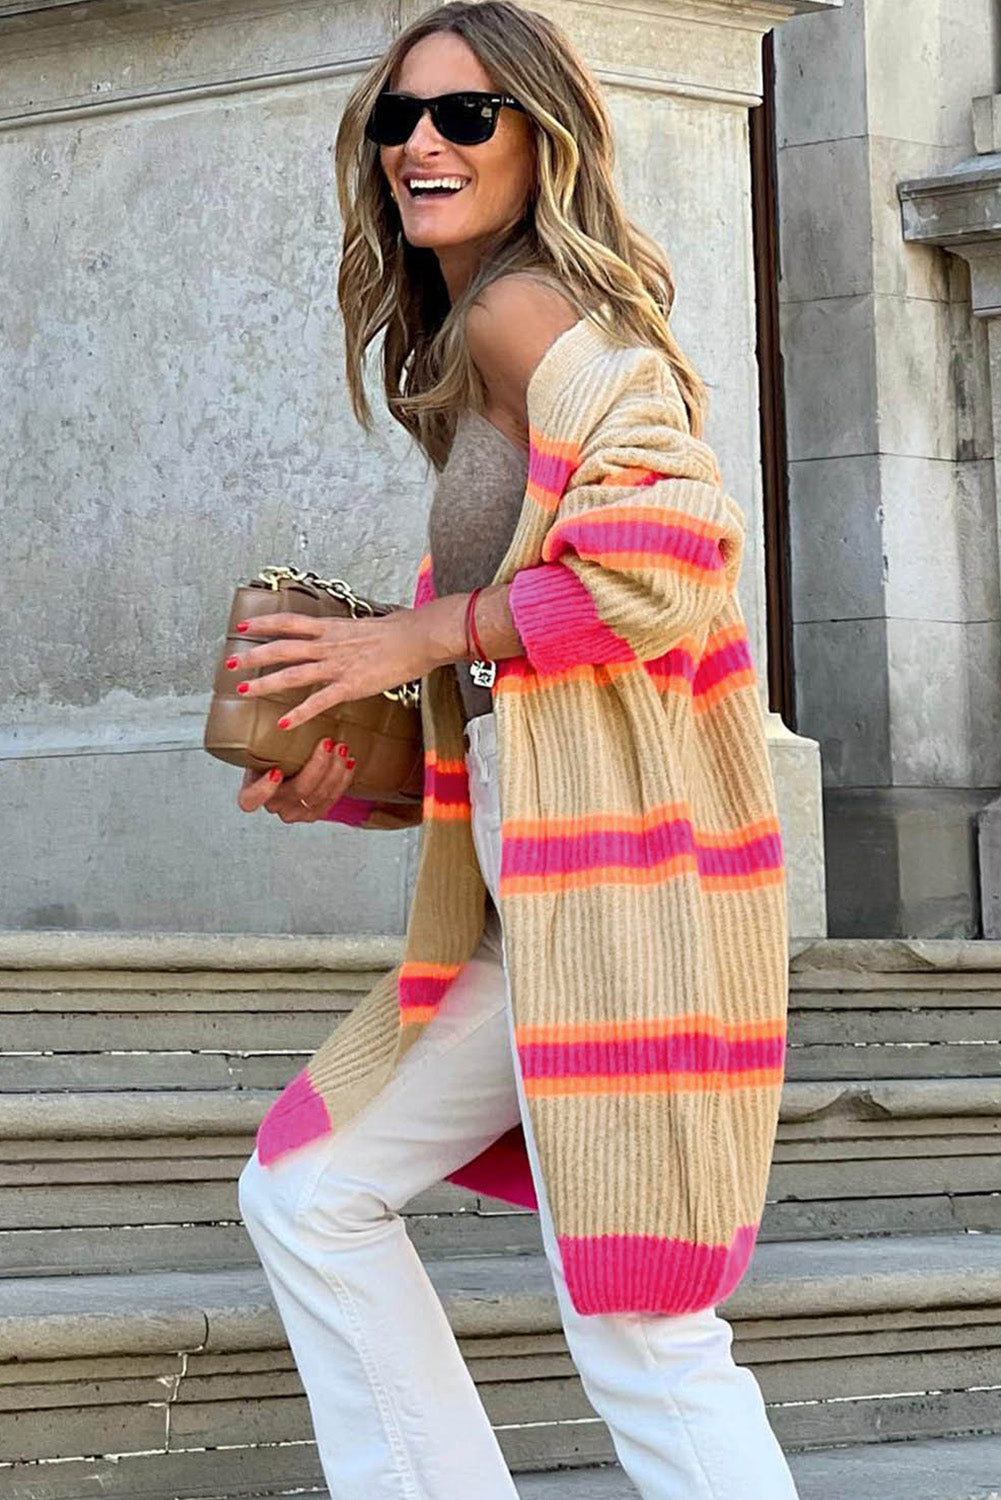 Ribbed Long Sleeve Cardigan - Kawaii Stop - Acrylic, Cardigan, Cardigans, Casual Style, Easy Care, Fashion Forward, Long Length, Ship From Overseas, Slightly Stretchy, Striped, SYNZ, Versatile Piece, Women's Clothing, Women's Fashion